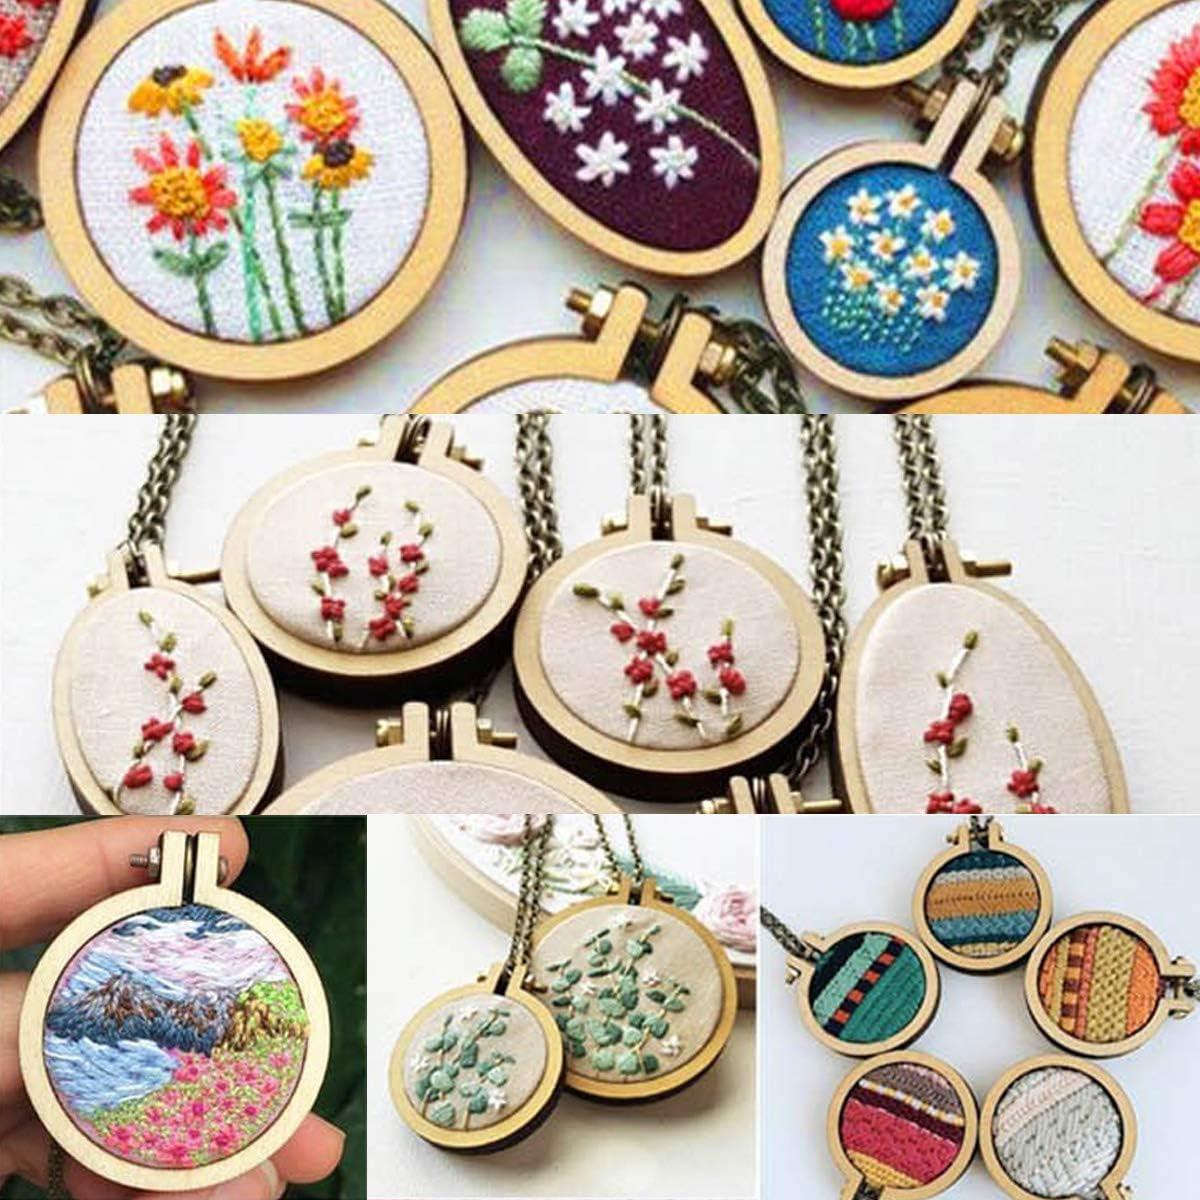 10pcs Bamboo Embroidery Hoops Round Cross Stitch Hoops/Decorative